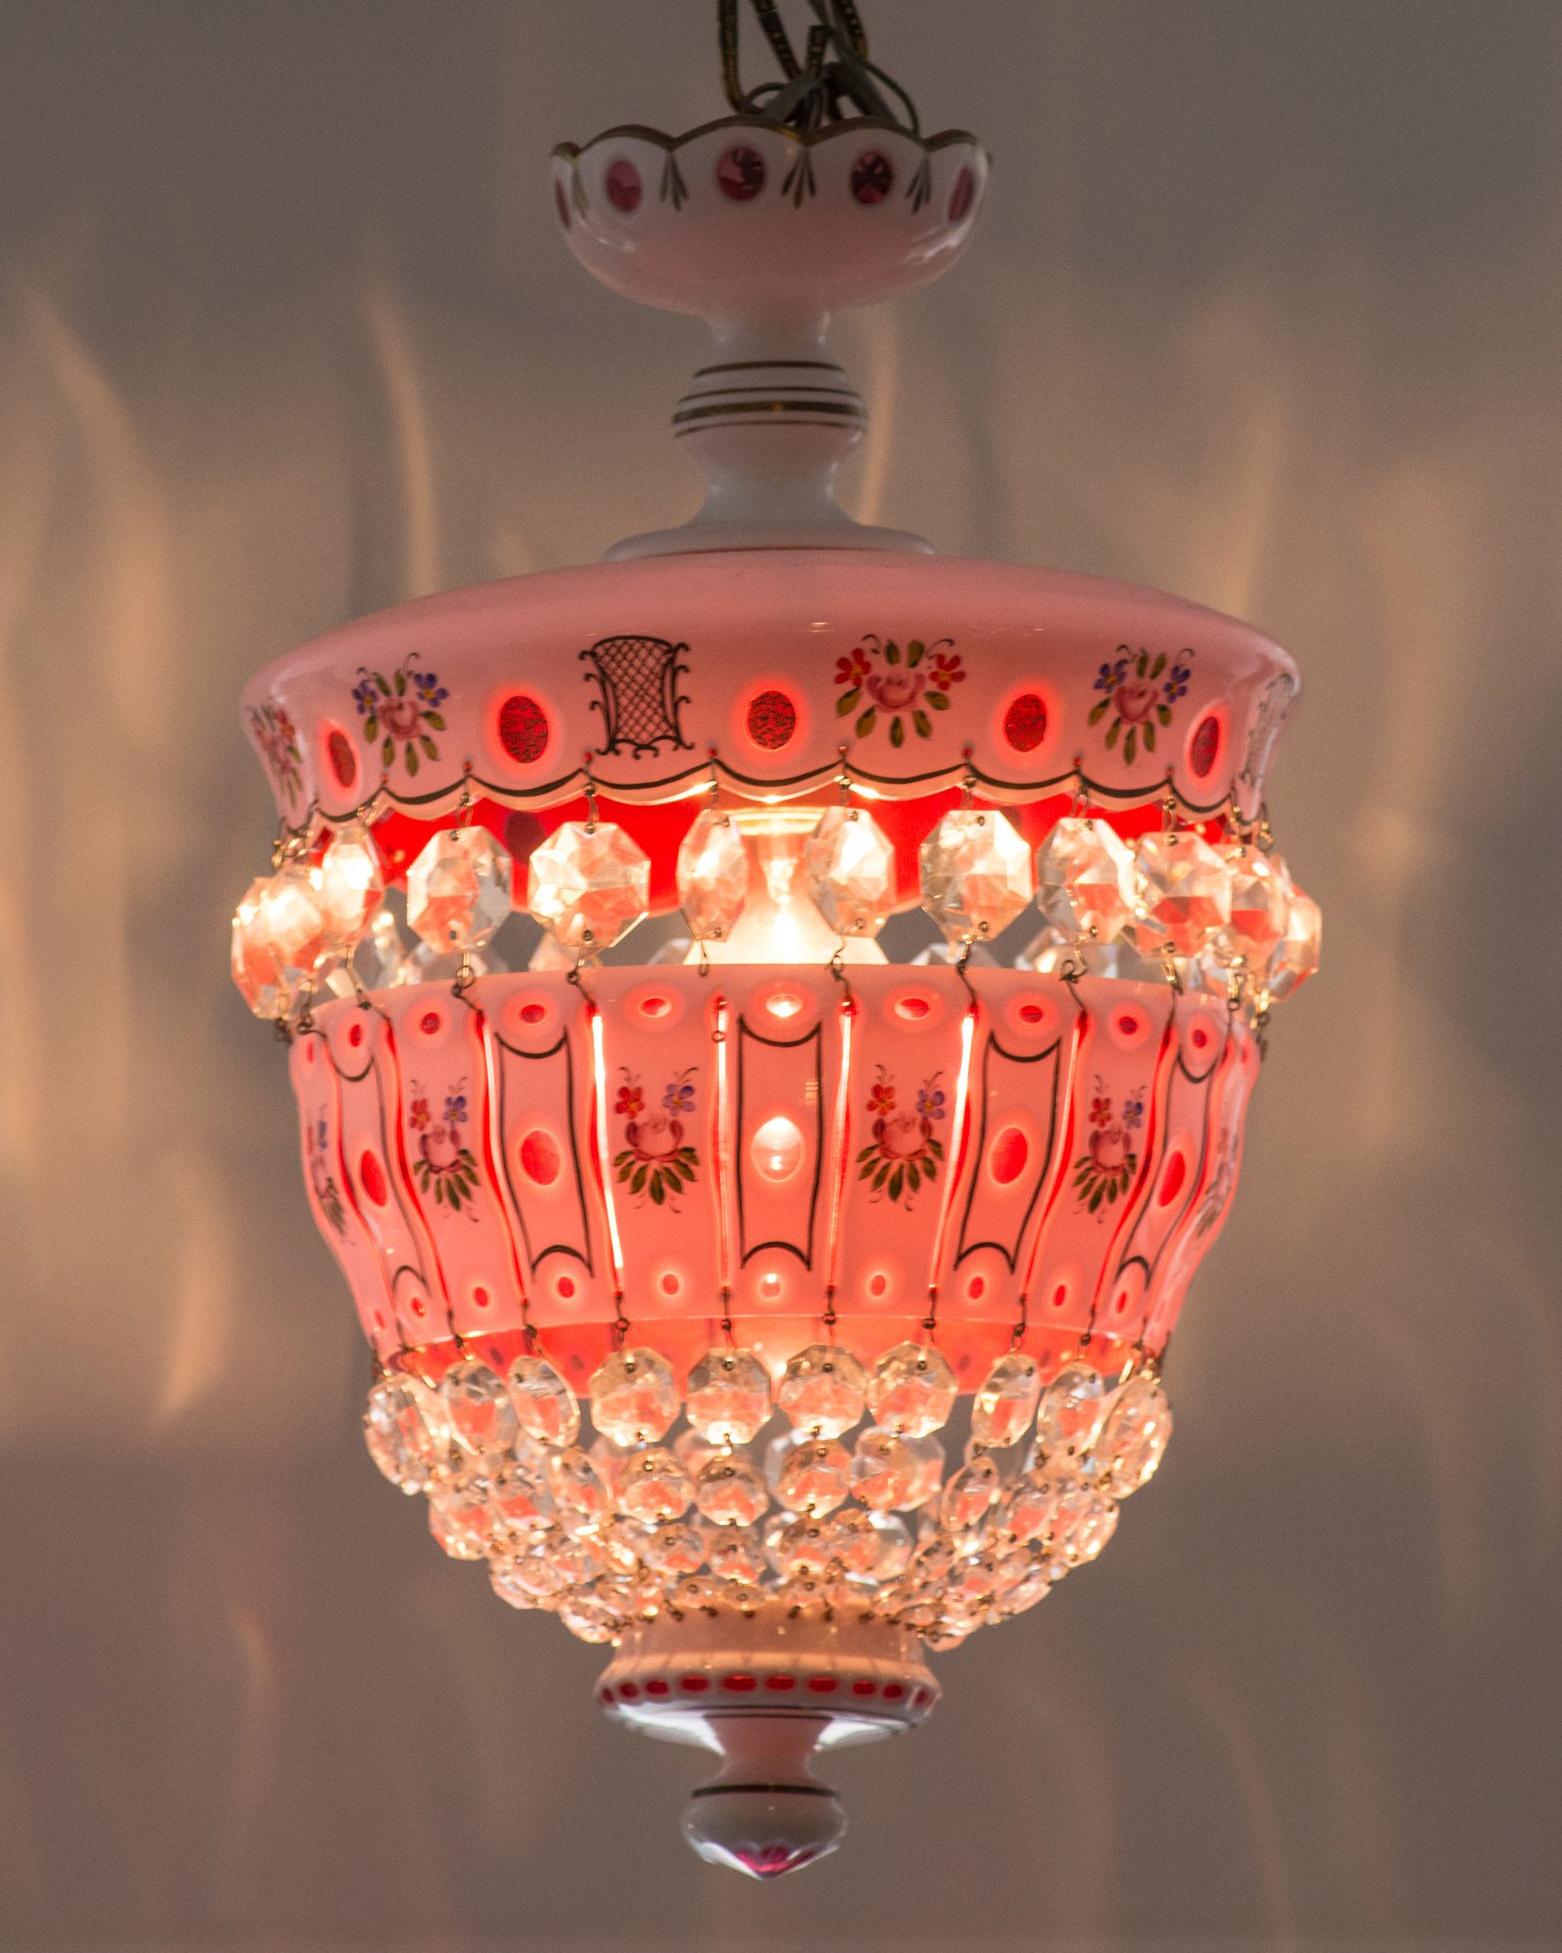 This delicate feminine antique bohemian pink and white chandelier would be perfect to illuminate a powder room, dressing room or girl’s bedroom. Known for its very unique and ornate aesthetic, antique bohemian glass is highly sought after and